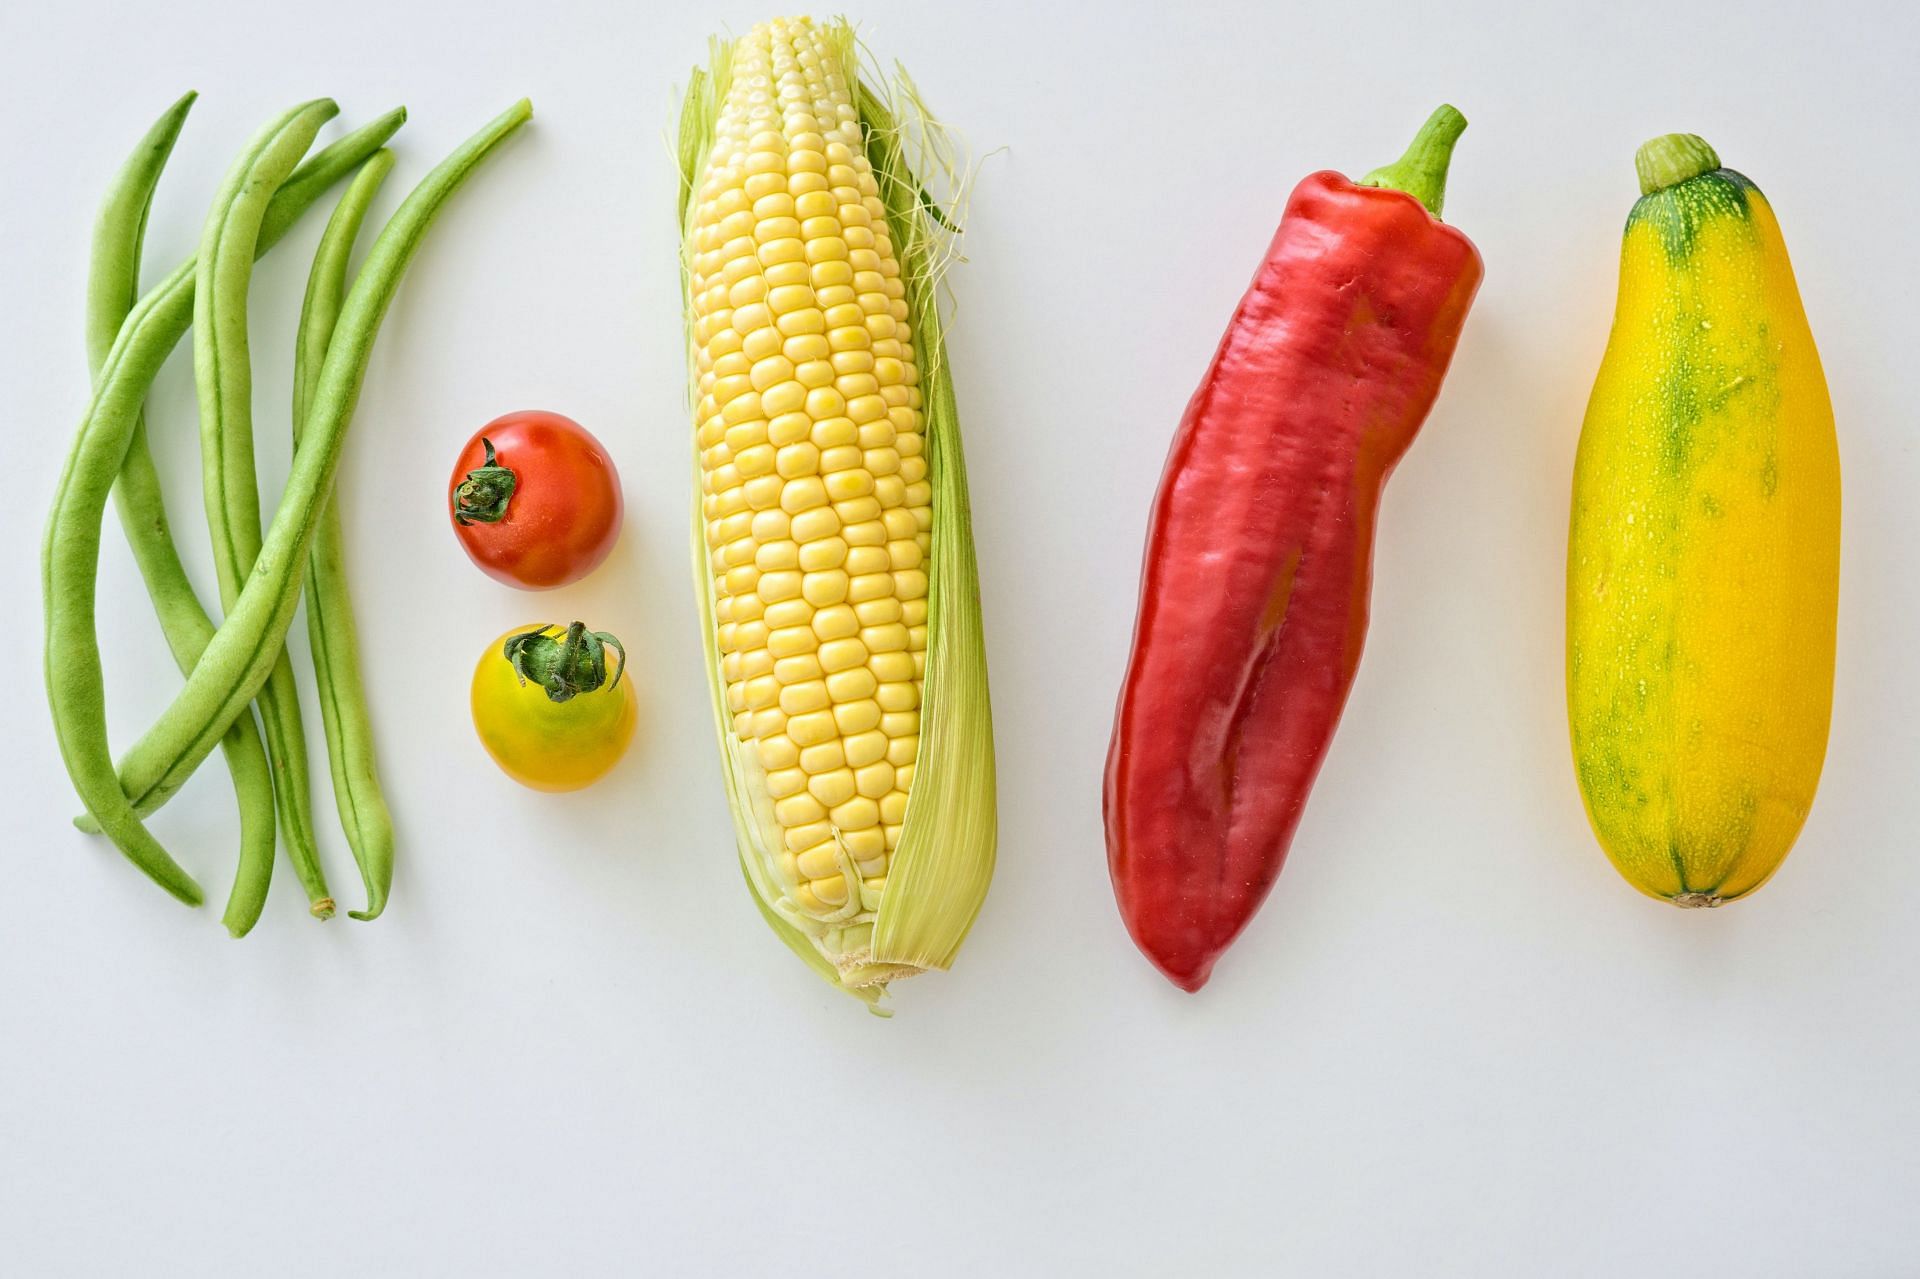 Summer vegetables to include in your diet. (Image via Pexels / Mali Maeder)